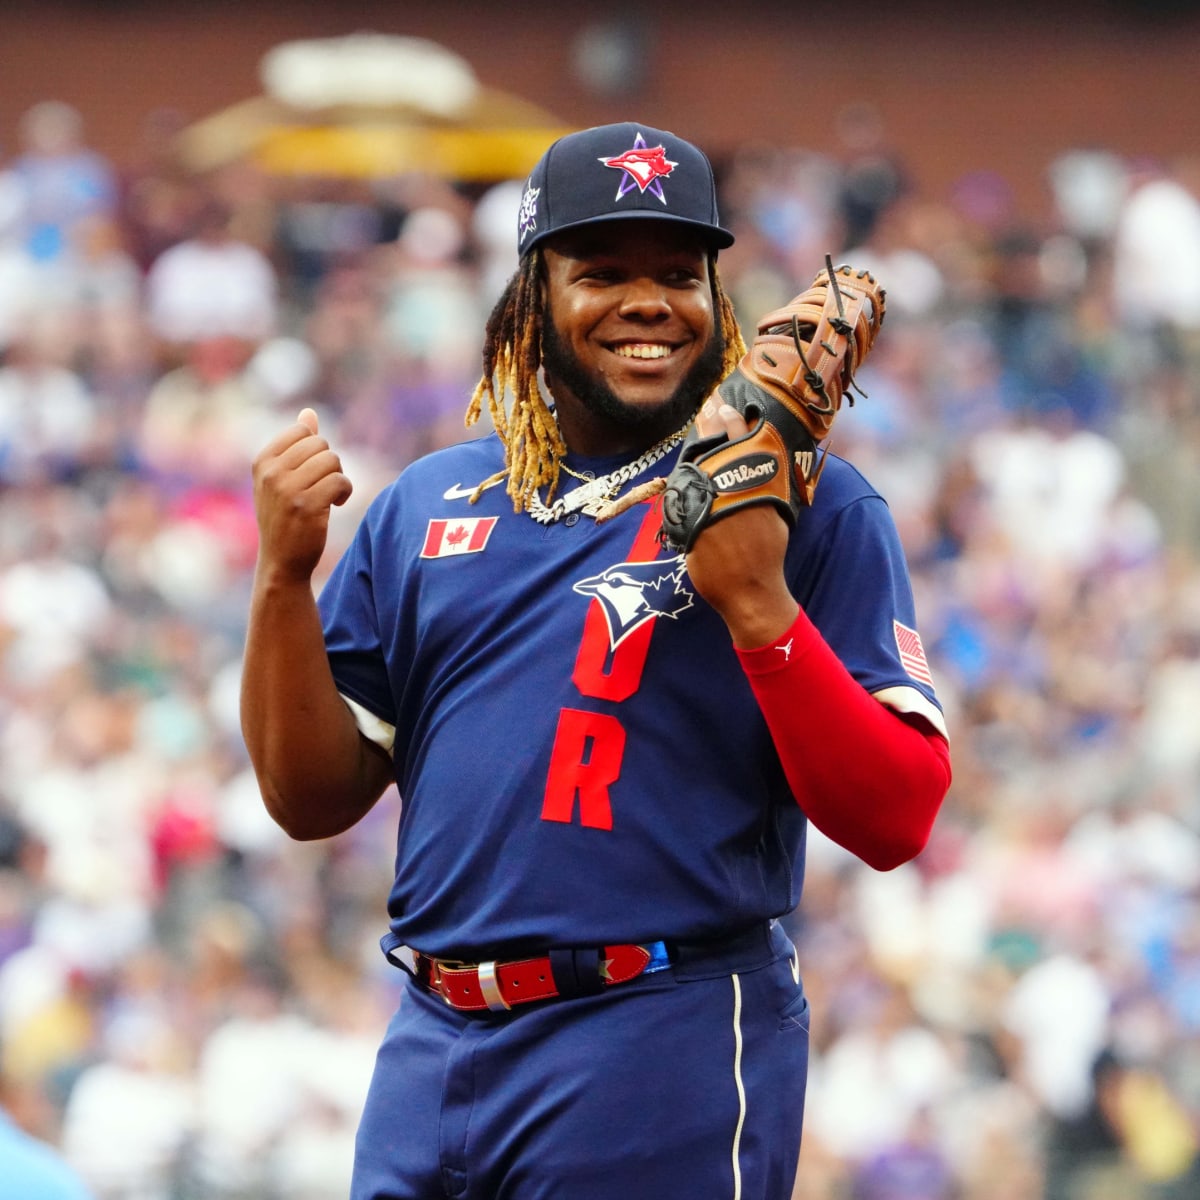 Blue Jays, Guerrero Jr. show out at 2021 mlb all star game